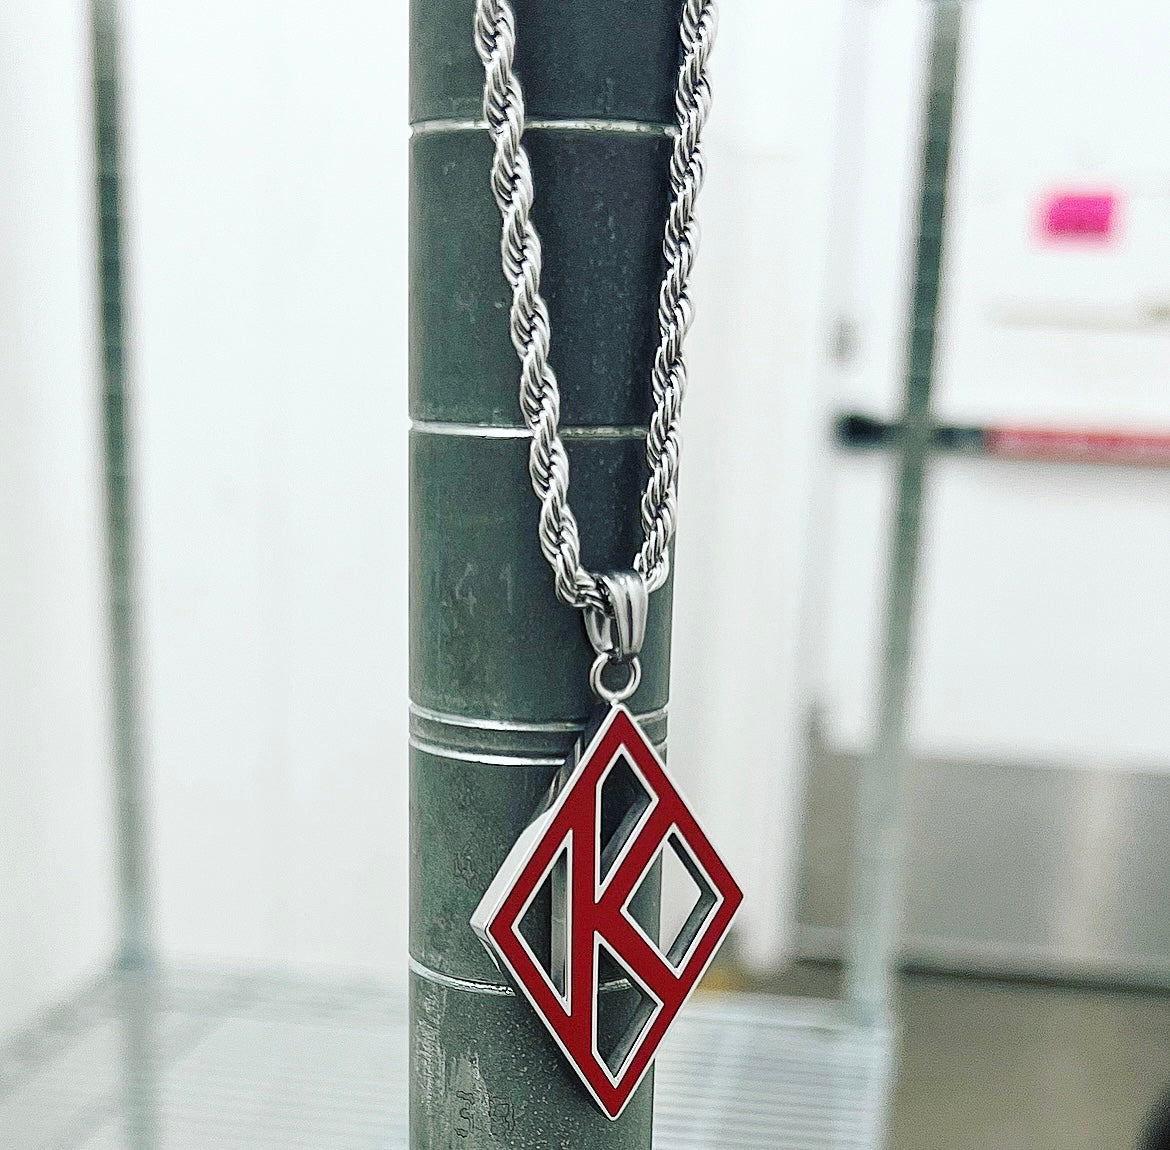 This stunning men's jewelry piece is the perfect way to show off your affiliation with Kappa Alpha Psi. The bold red color and intricate design make it a true standout accessory that will complement any outfit. Ideal for members of Kappa Alpha Psi fraternities , this necklace is a must-have for any collection.